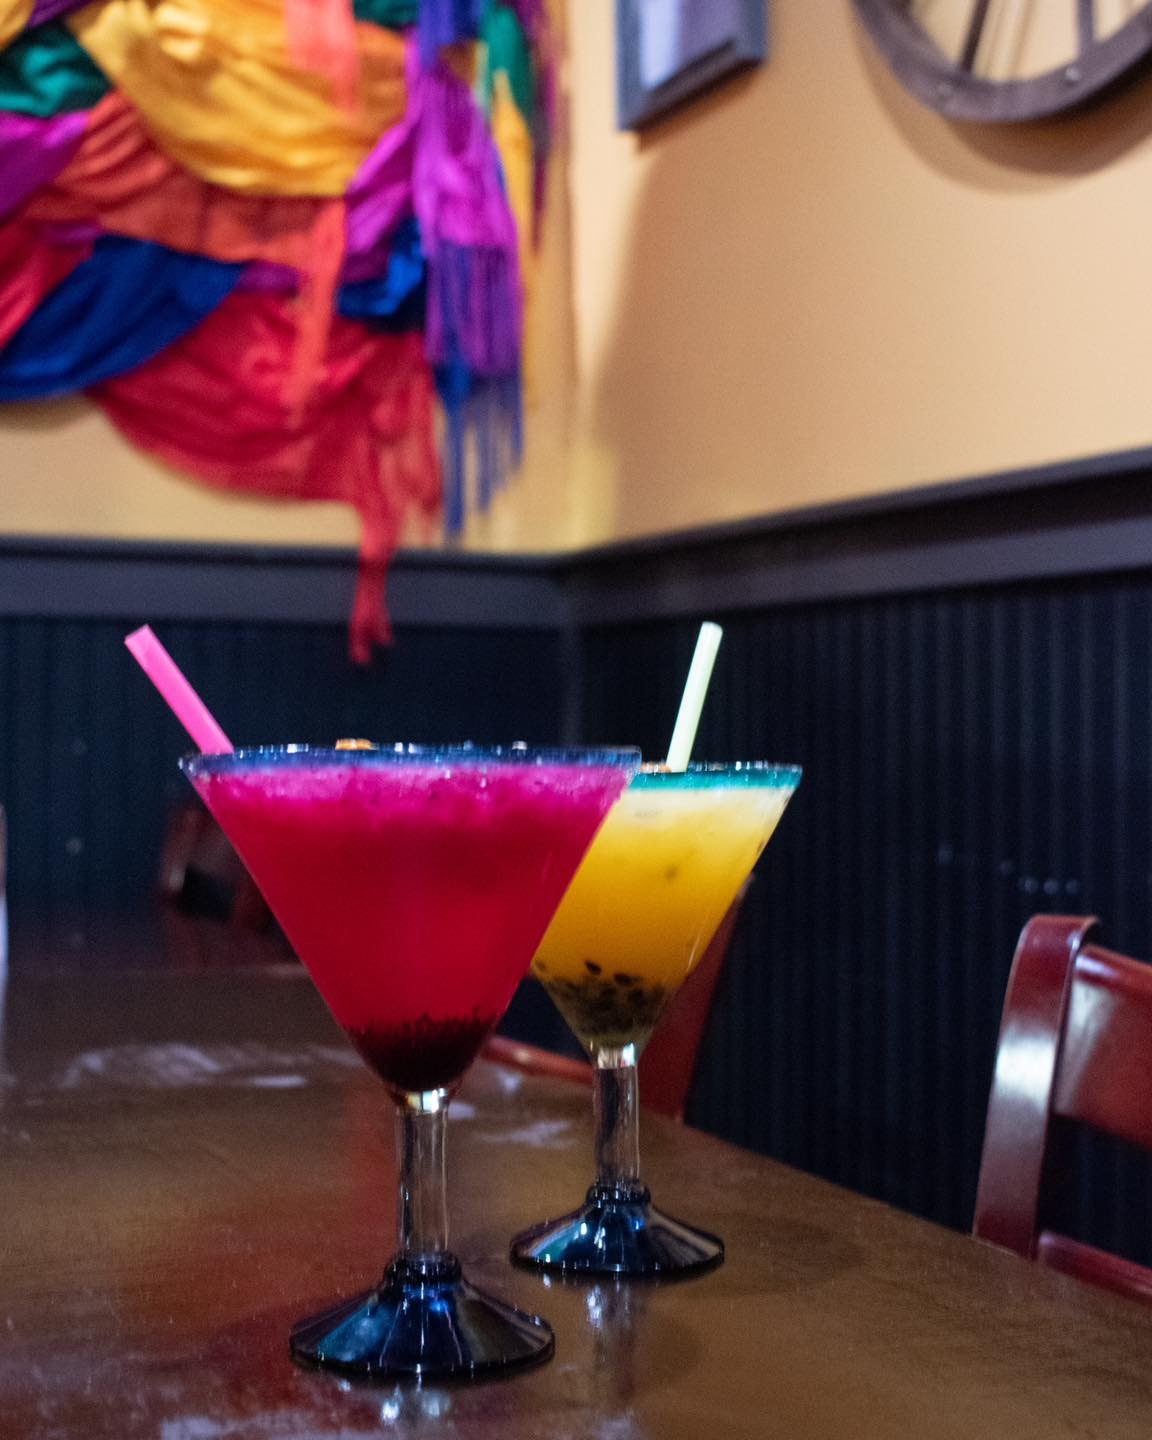 Give your margarita a unique twist by adding any of our fruit mixes! We prepared these with passion fruit and raspberry 😍🍸

Visit Avocados Mexican Restaurant to try your favorite flavor! 🇲🇽
.
.
.
#bostonfoodies #southshorema #MexicanEats #Authent